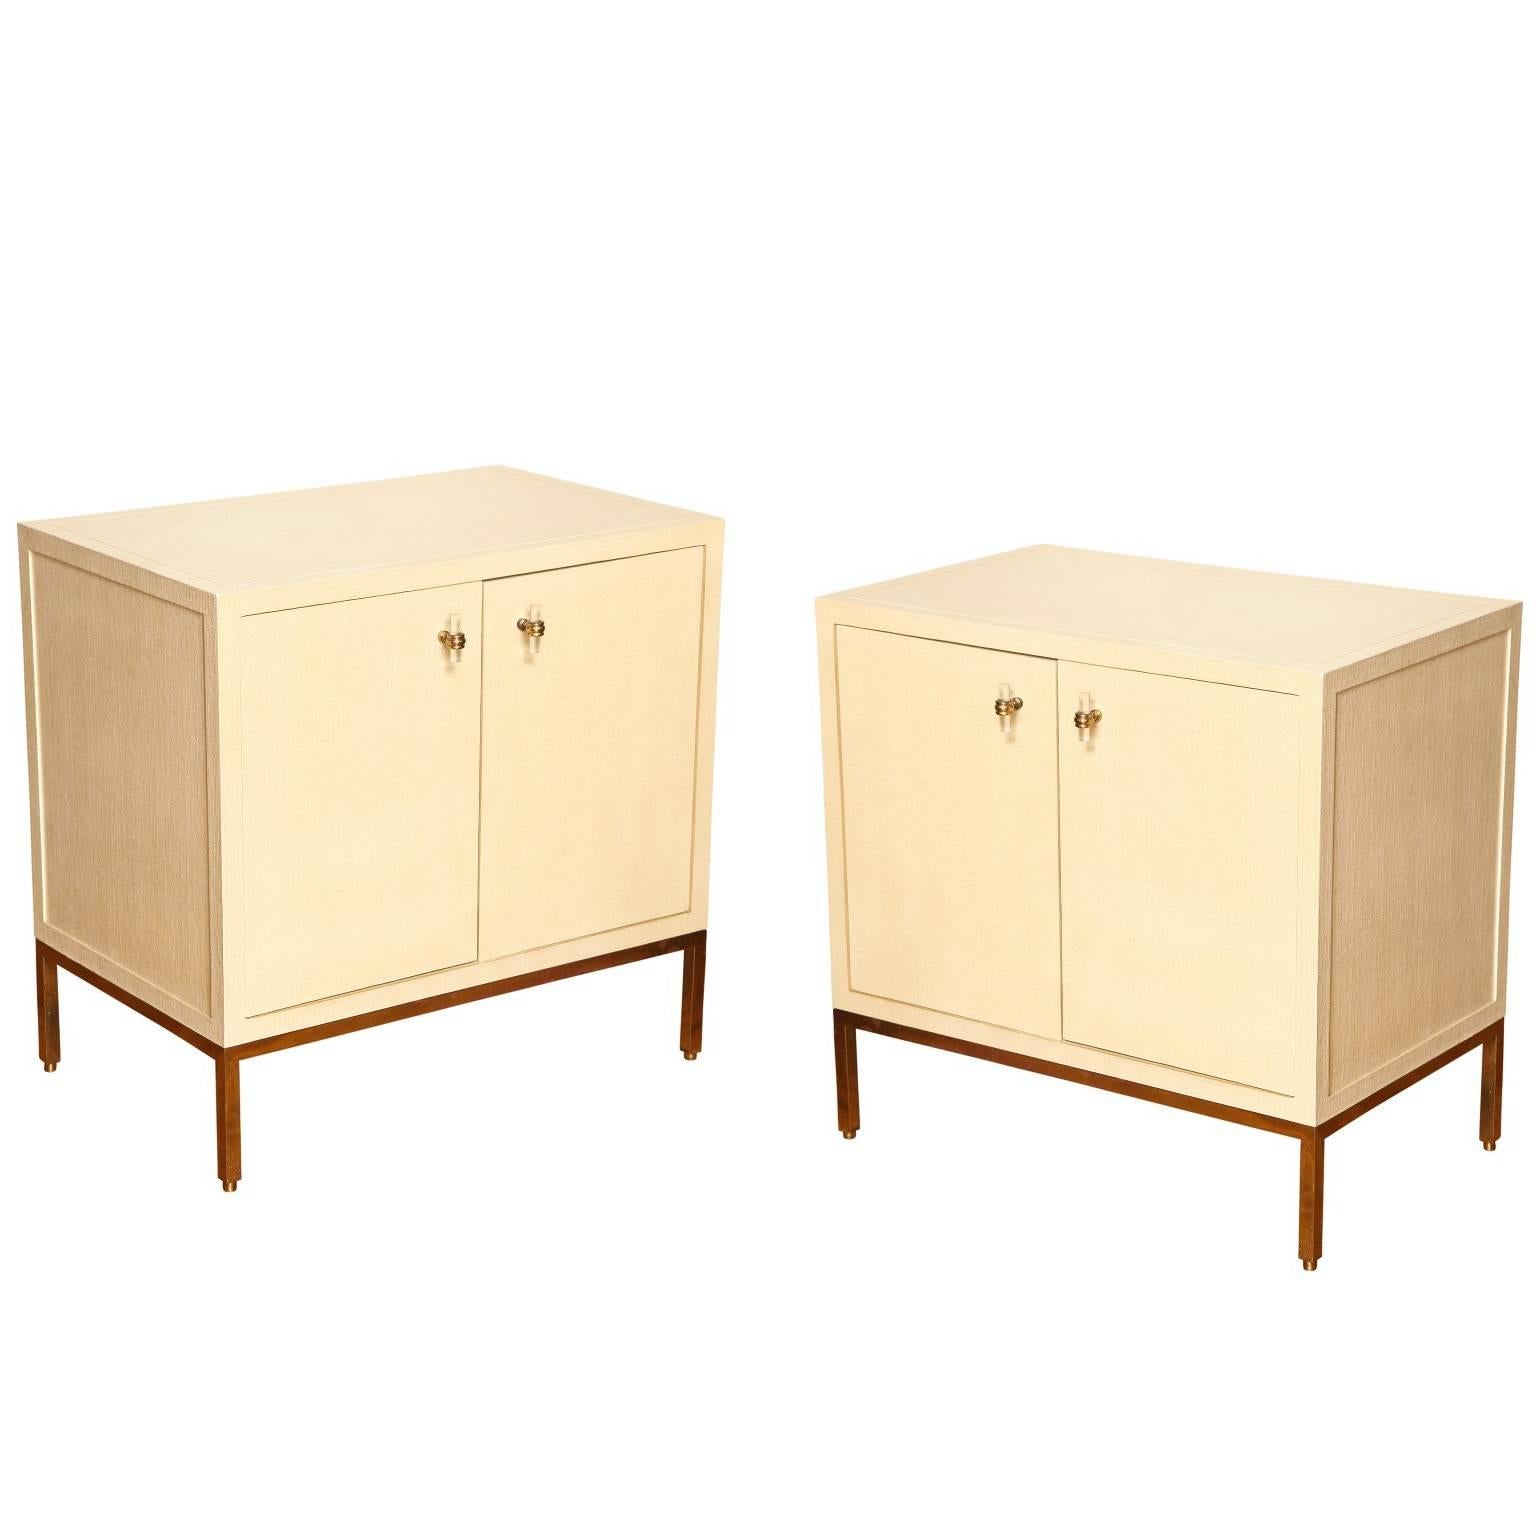 Pair of Lacquered Linen Cabinets or Side Tables